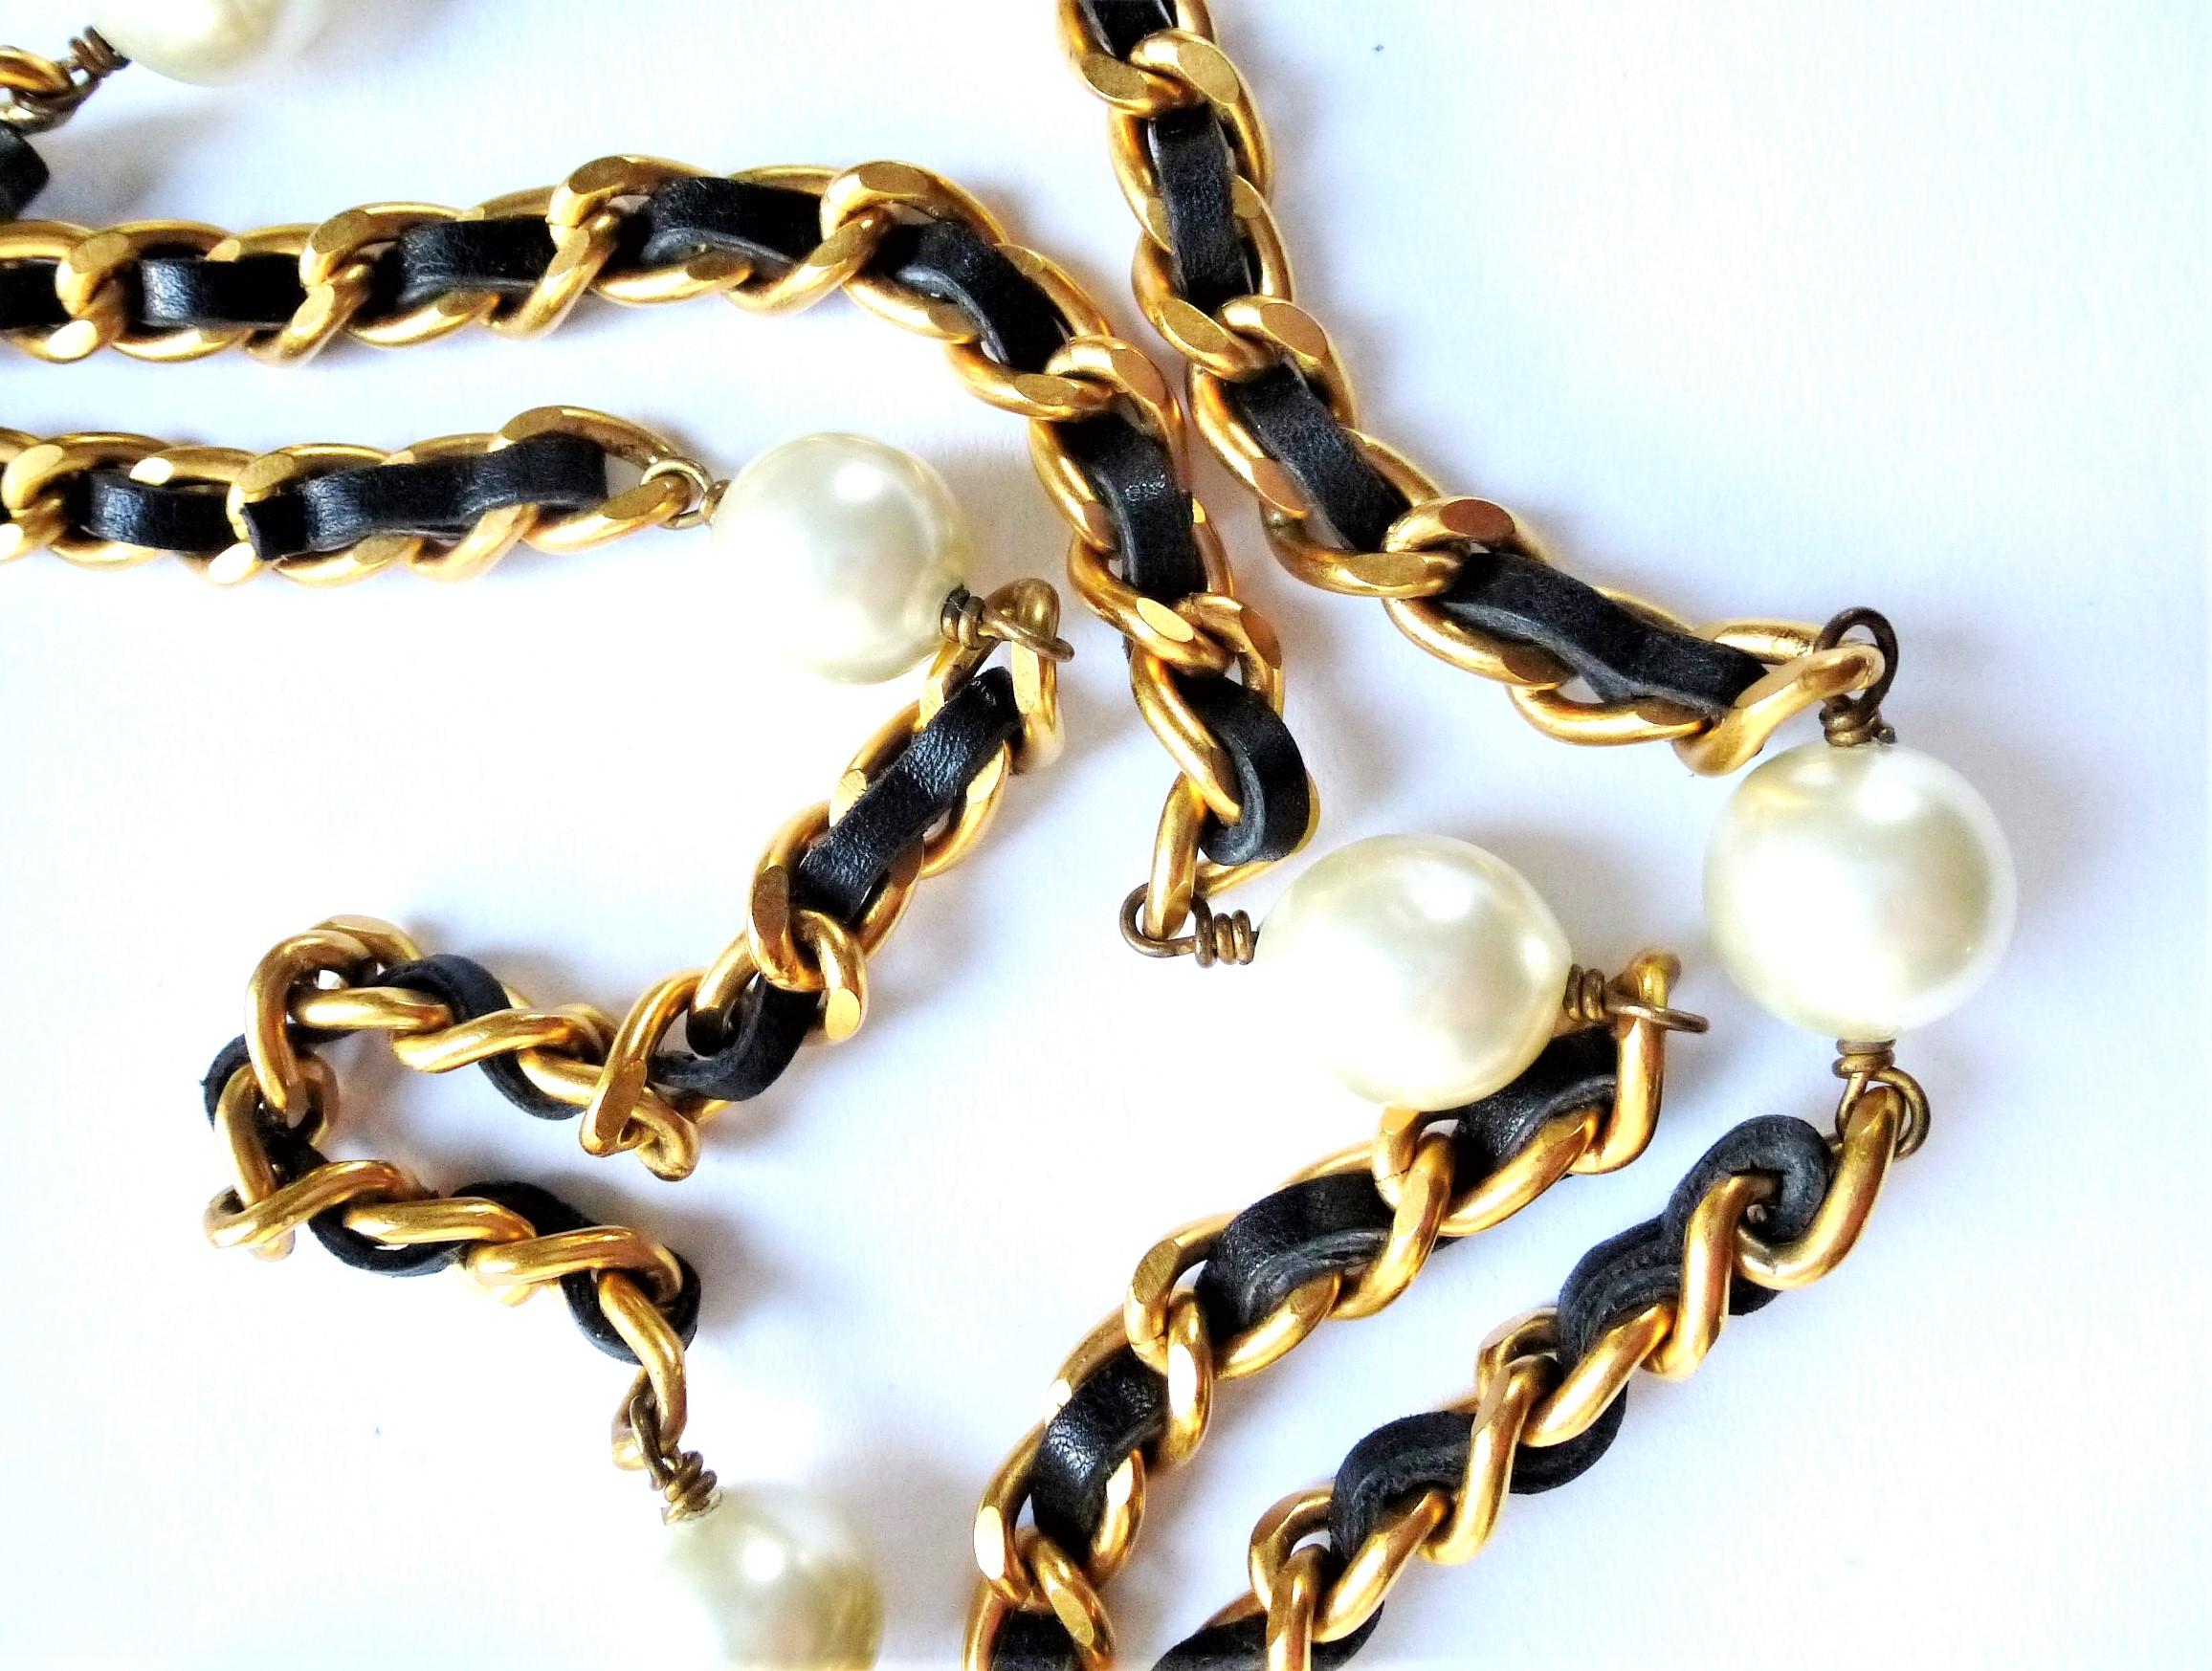 Modern Iconic Chanel chain with leather woven throughout and Chanel pearls, 1990s